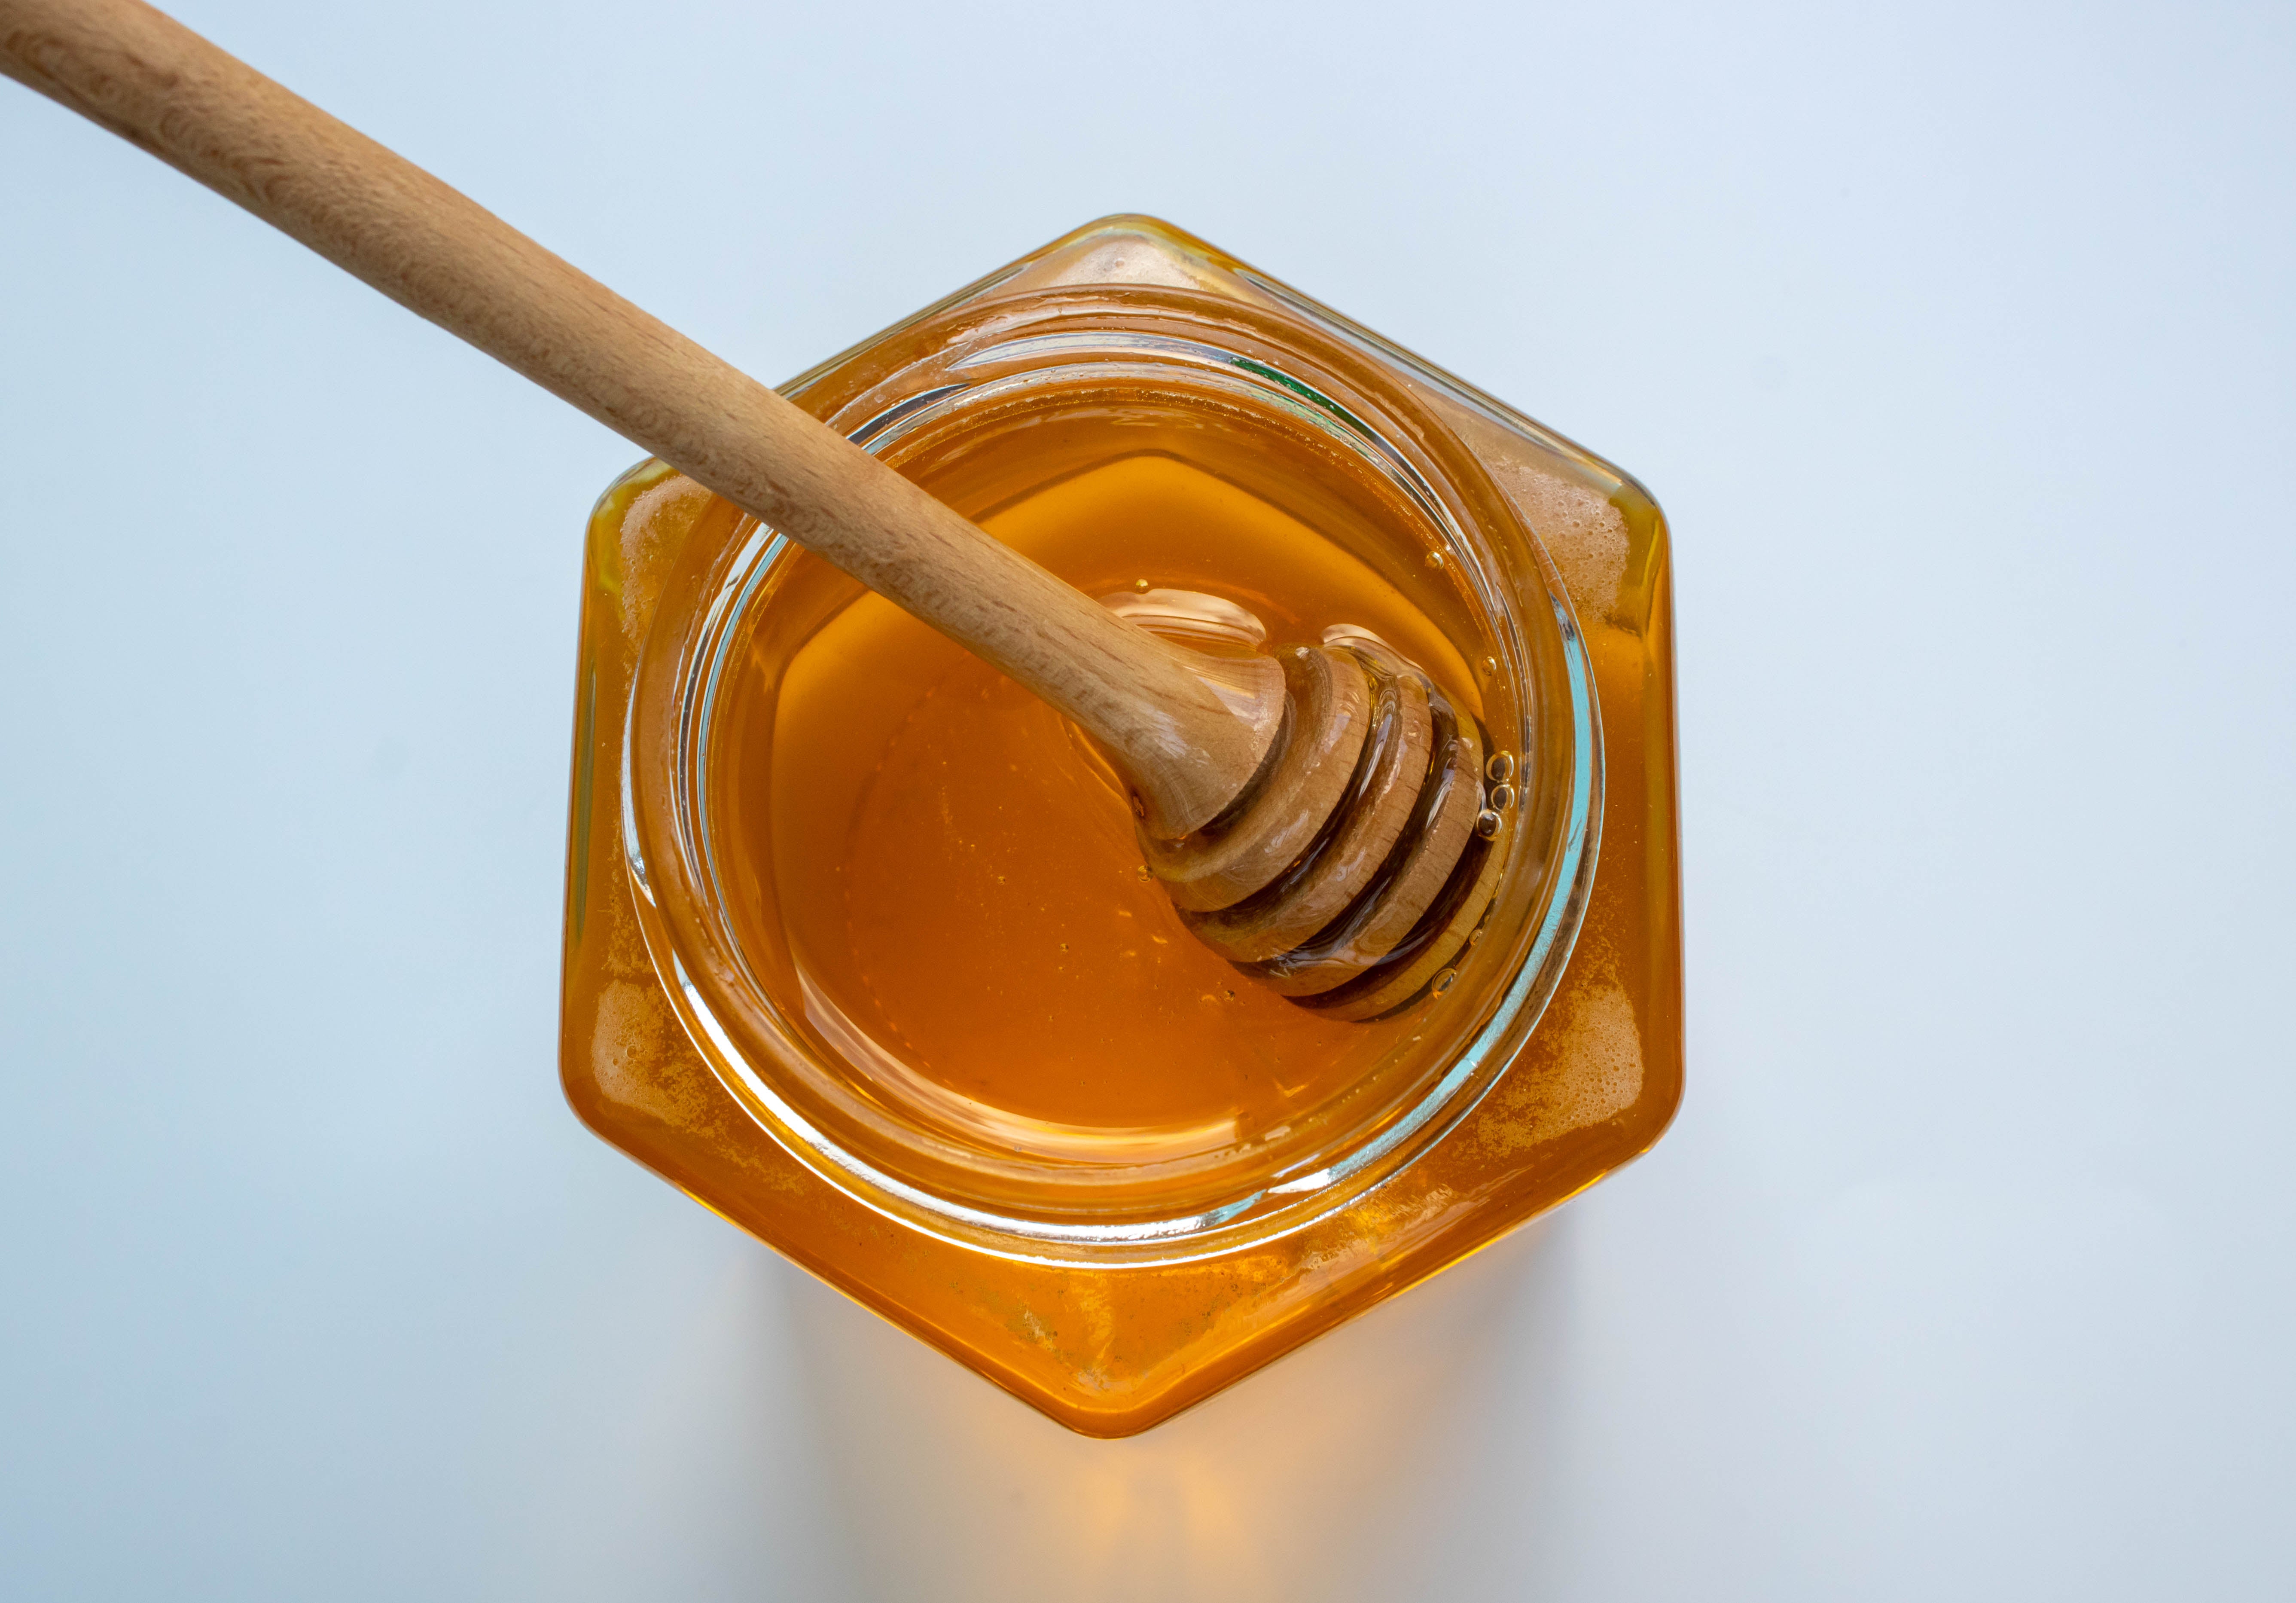 A hexagonal glass jar of honey with a honey dipper. Honey is a popular home remedy for baby cough and cold.